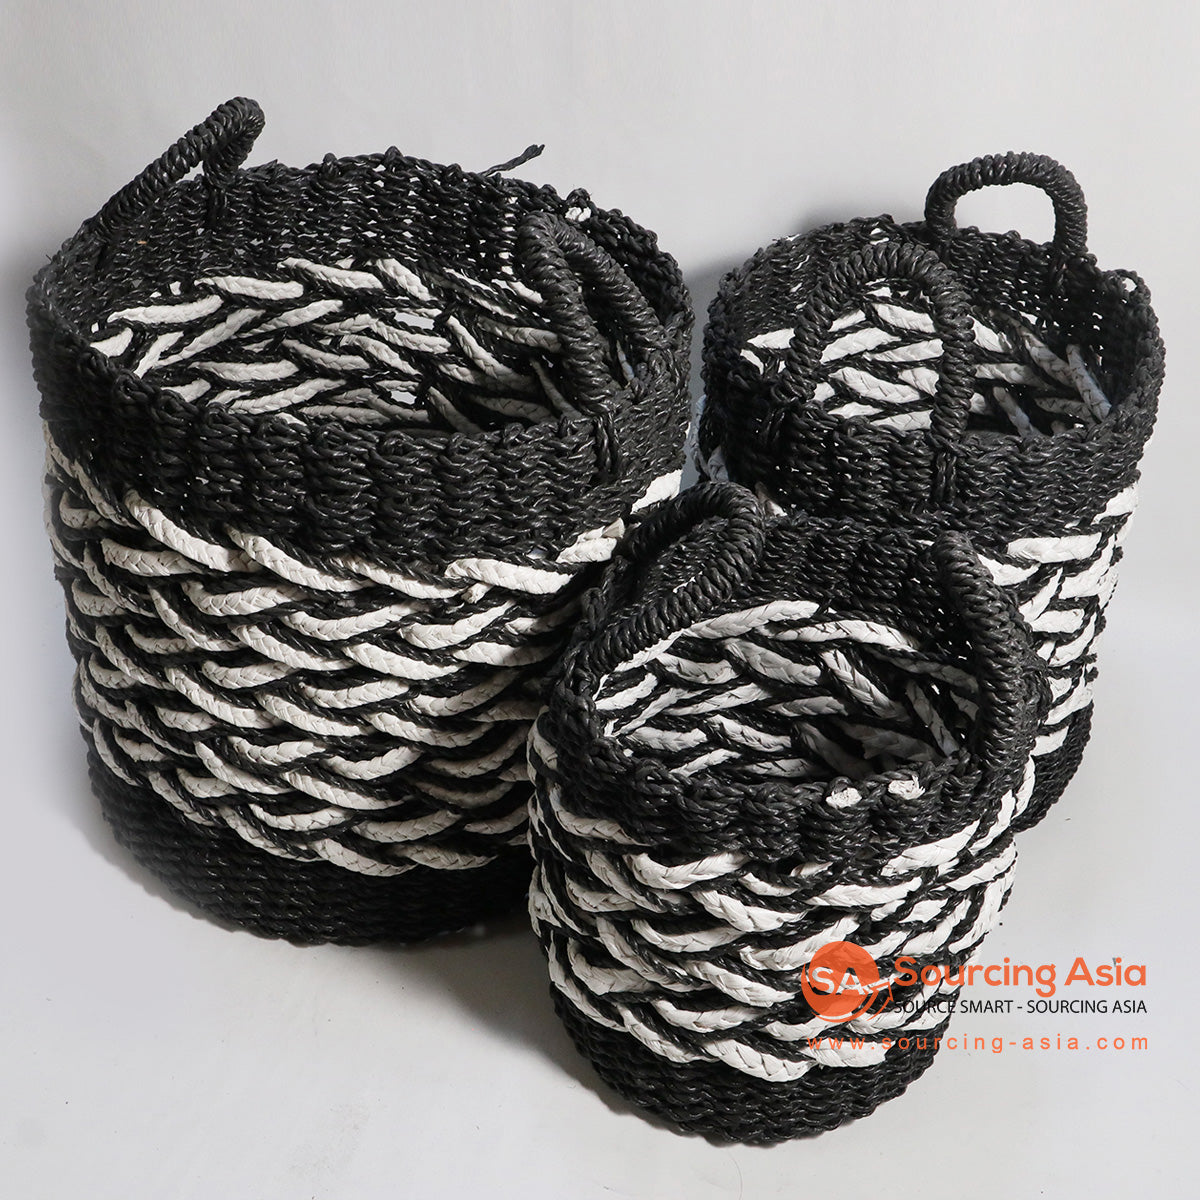 HBSC138-1 SET OF THREE BLACK AND WHITE SEAGRASS BASKETS WITH HANDLE